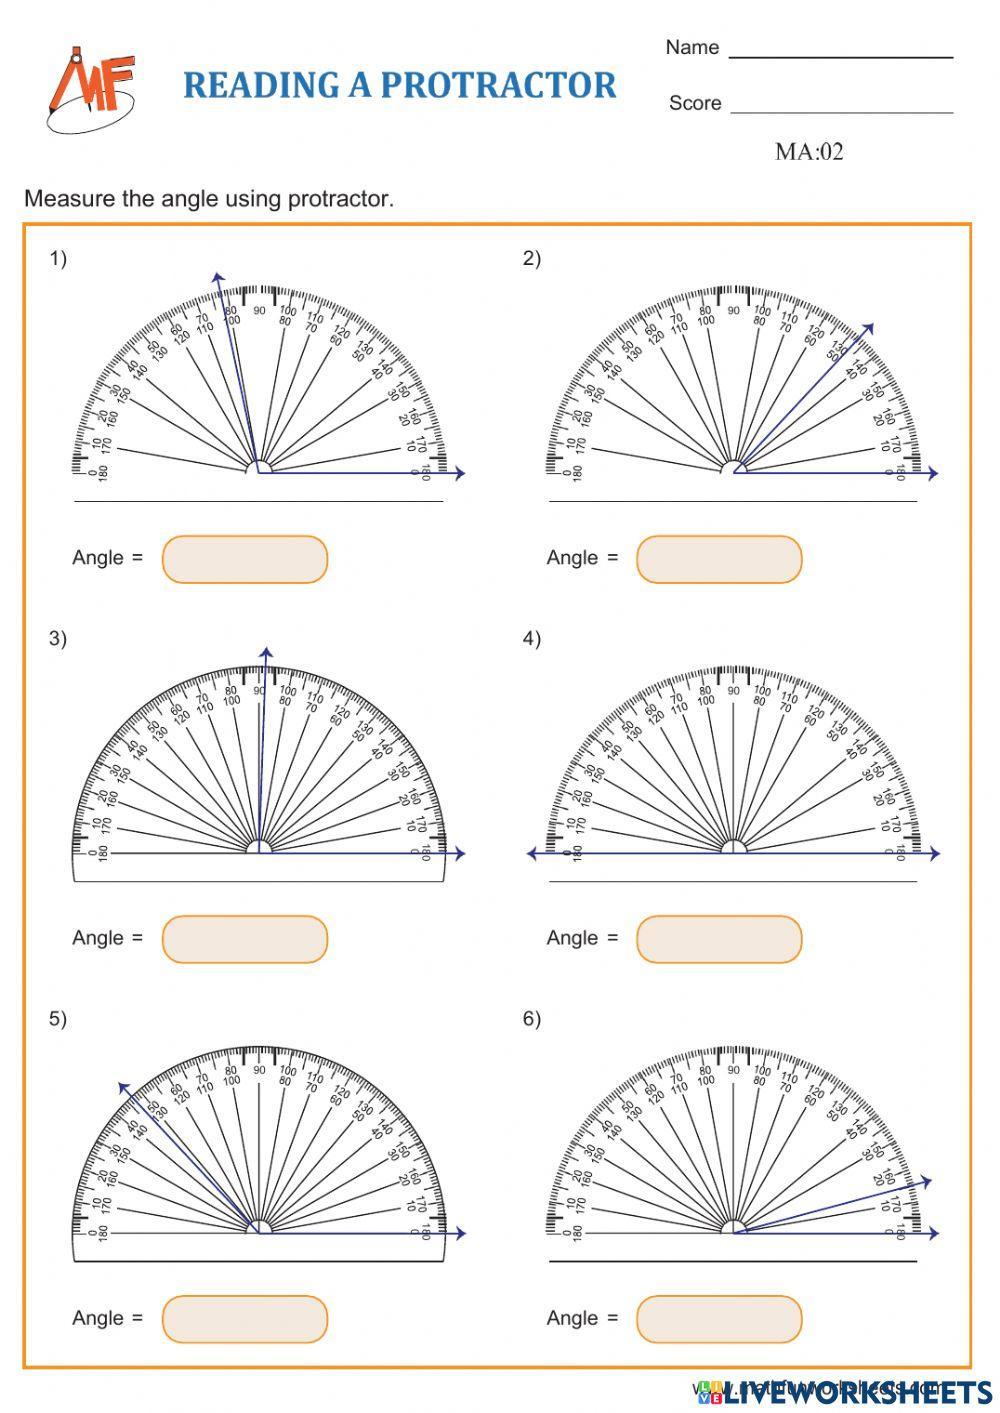 Measuring Angles using a protractor